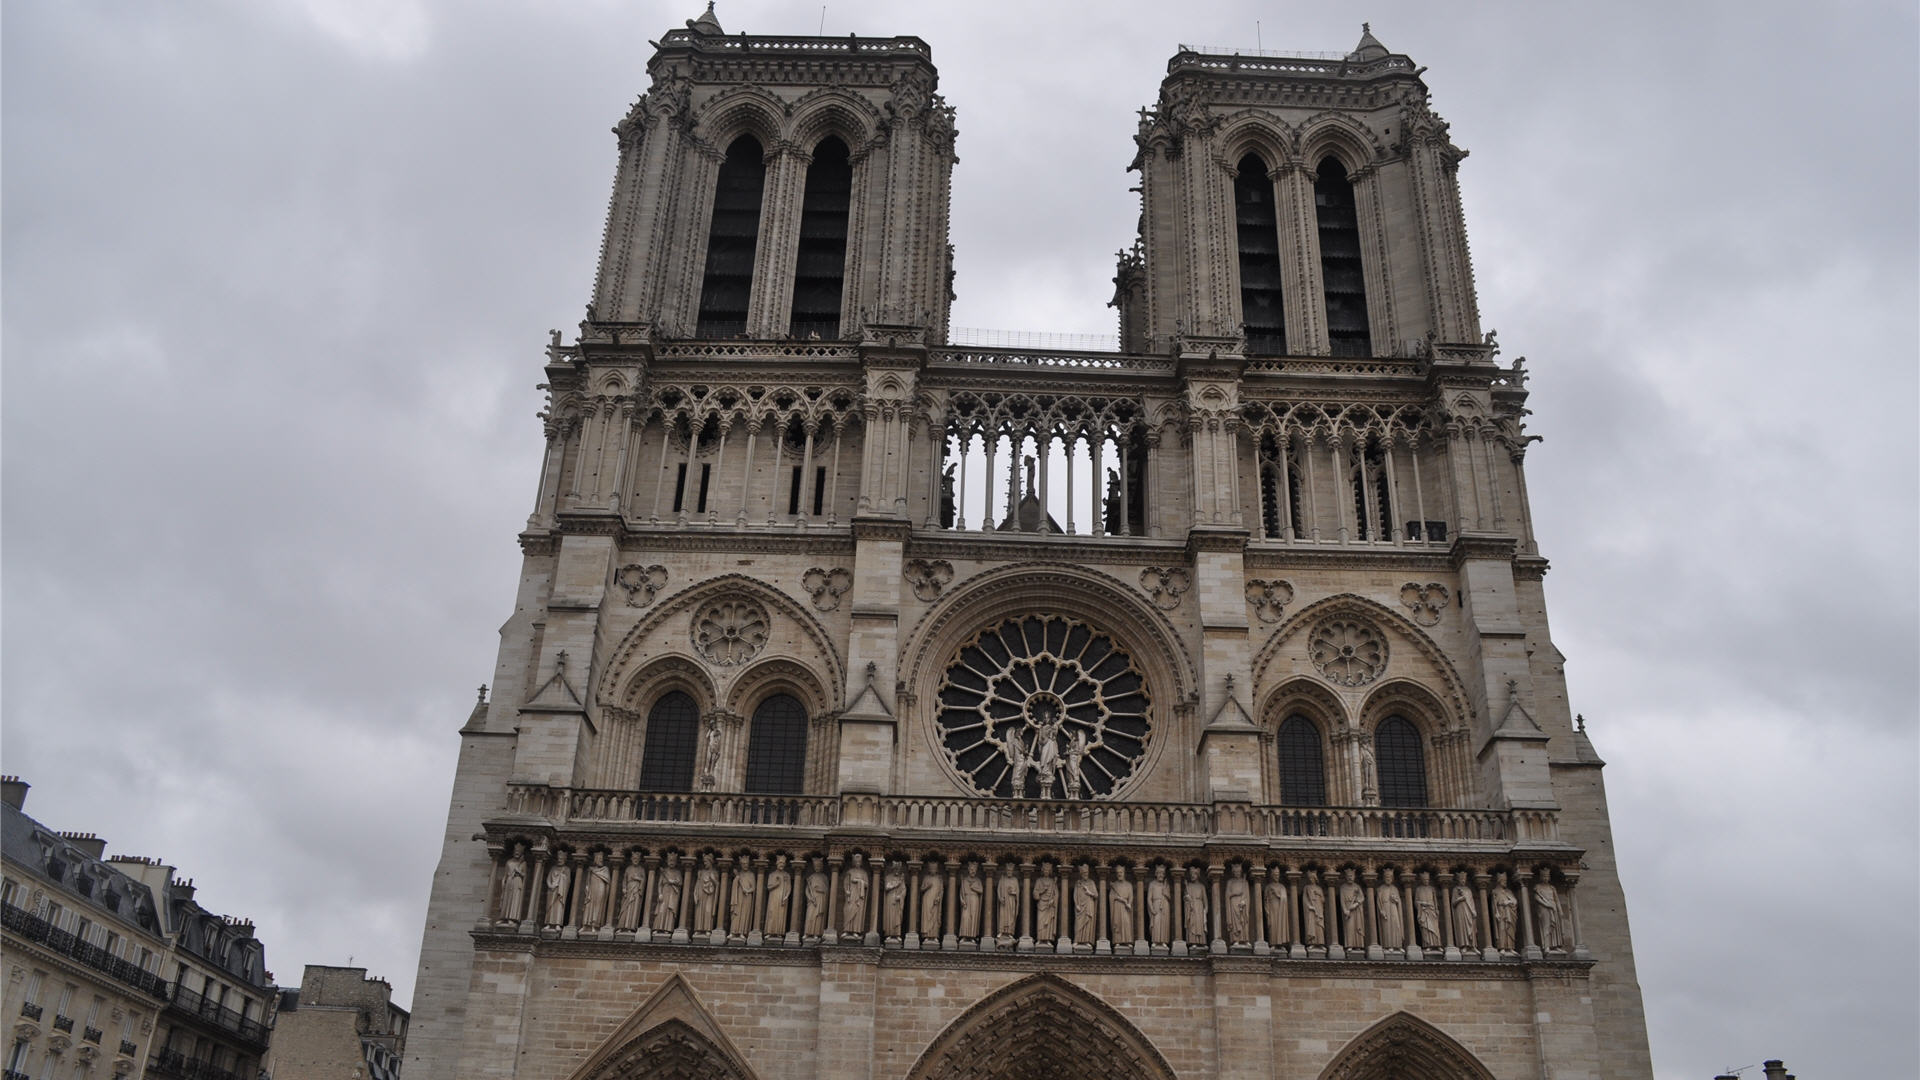 Related search Notre Dame Image 1920x1080 Paris France